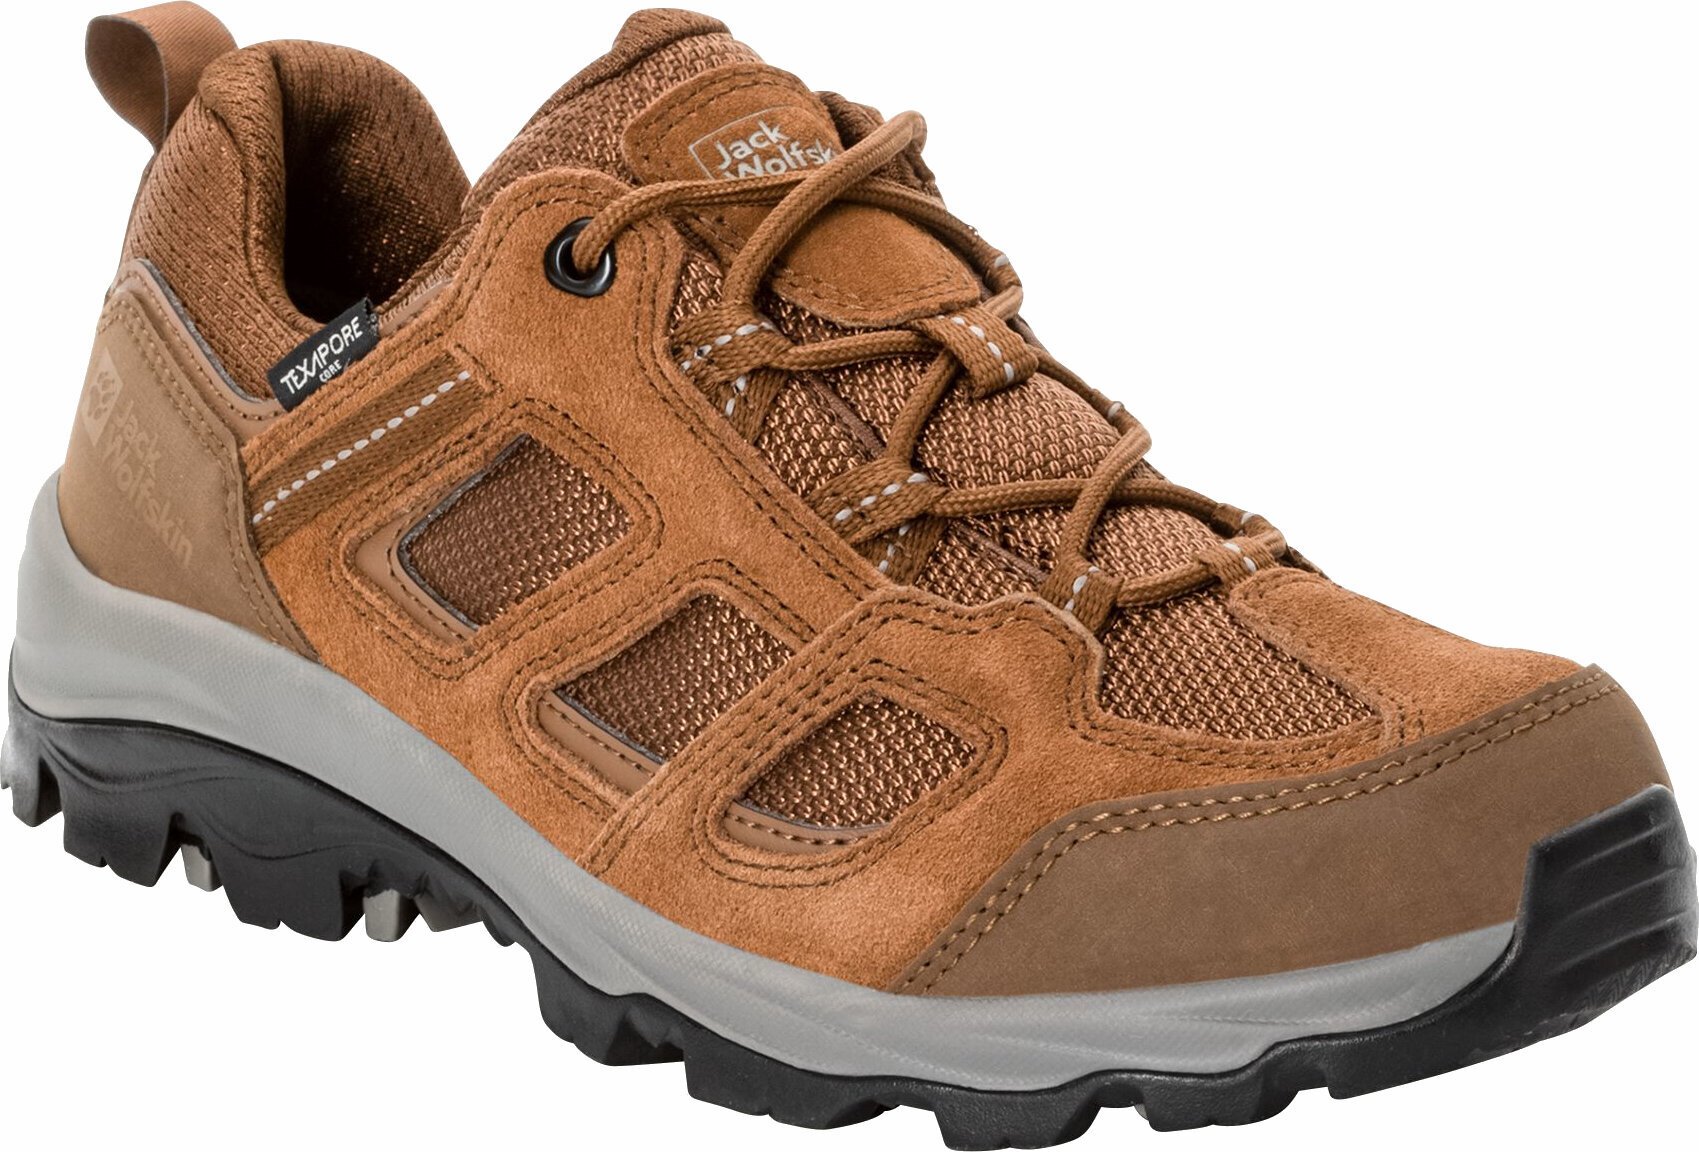 Womens Outdoor Shoes Jack Wolfskin Vojo 3 Texapore Low W Squirrel 40 Womens Outdoor Shoes